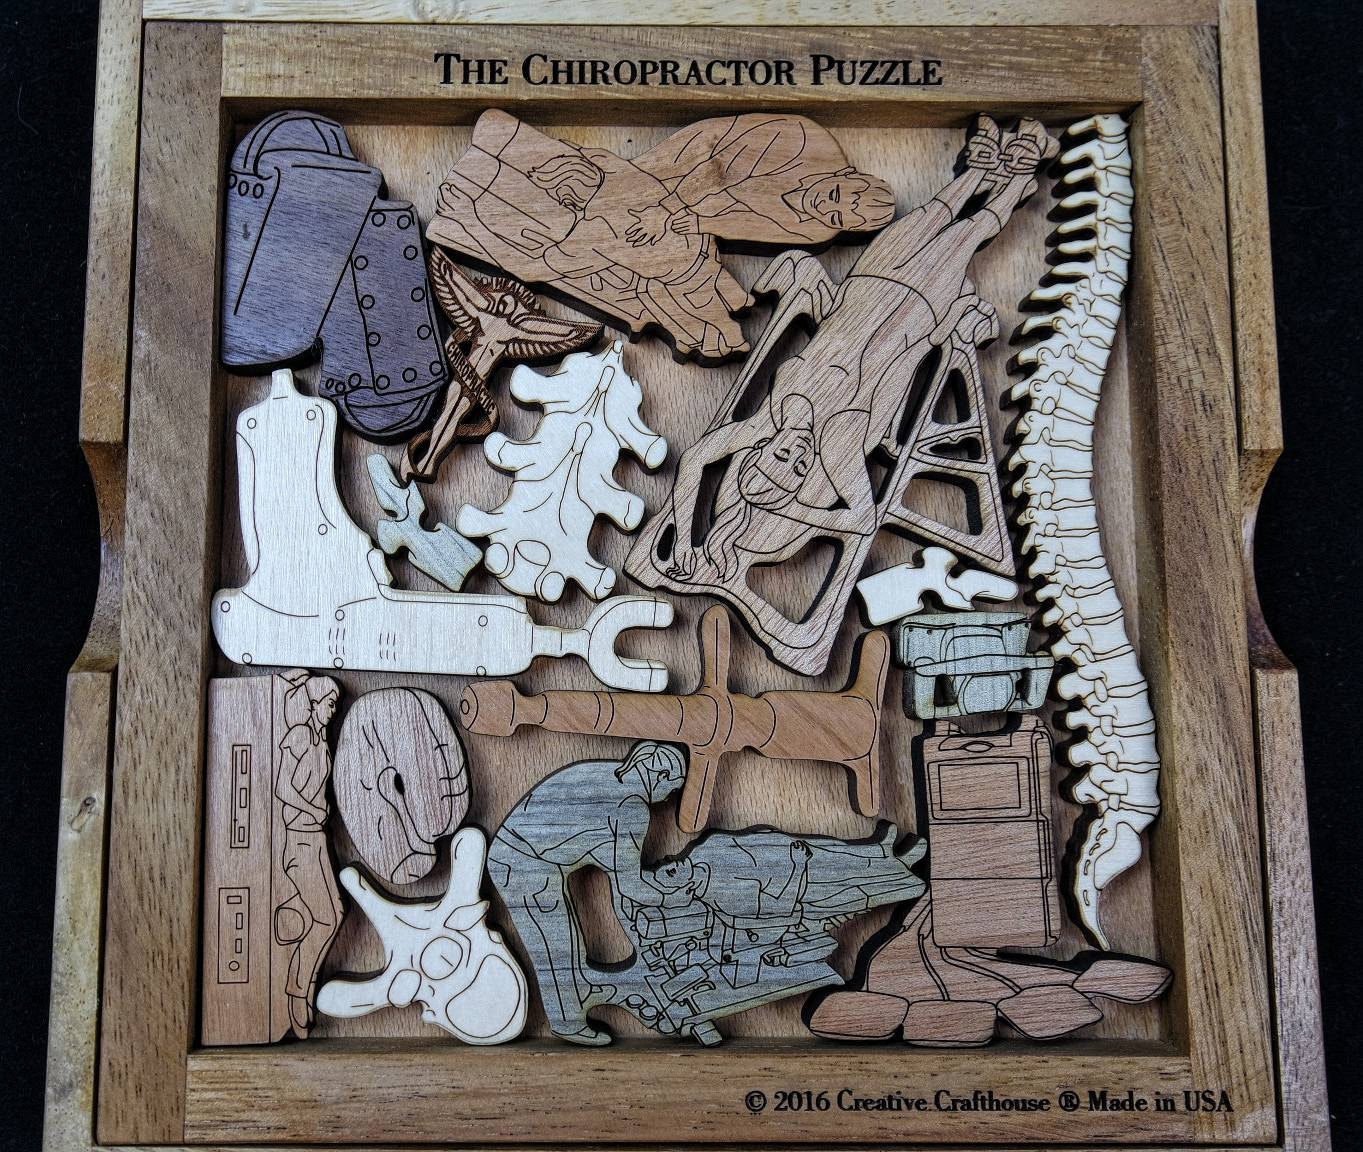 The Chiropractor Puzzle by Creative Crafthouse 